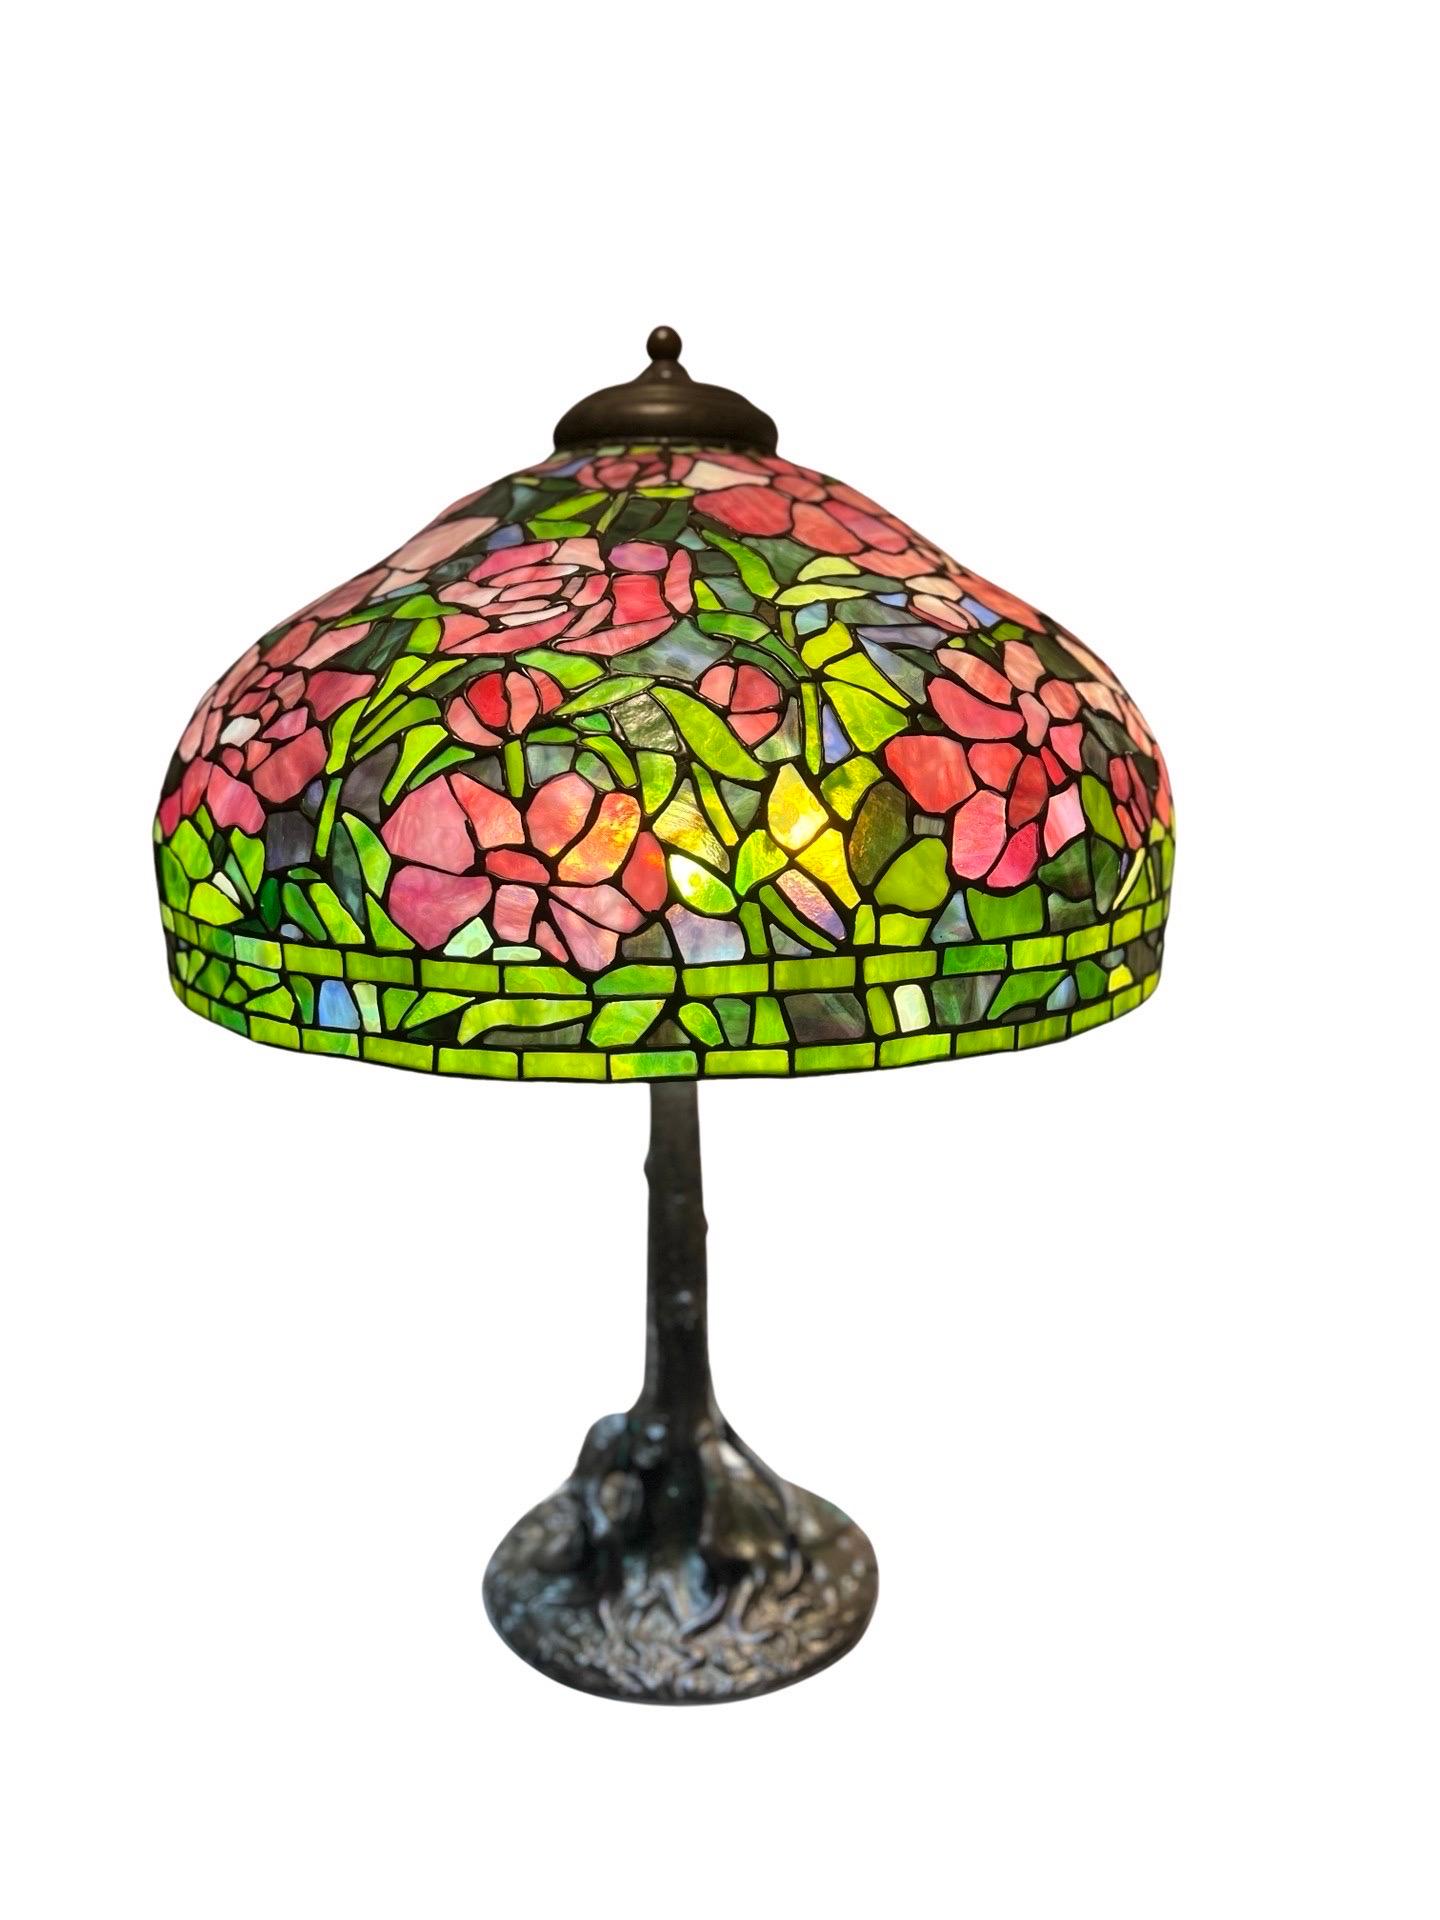 Unique Art Glass & Metal Company Leaded Glass Peony Table Lamp C. 1915 For Sale 1